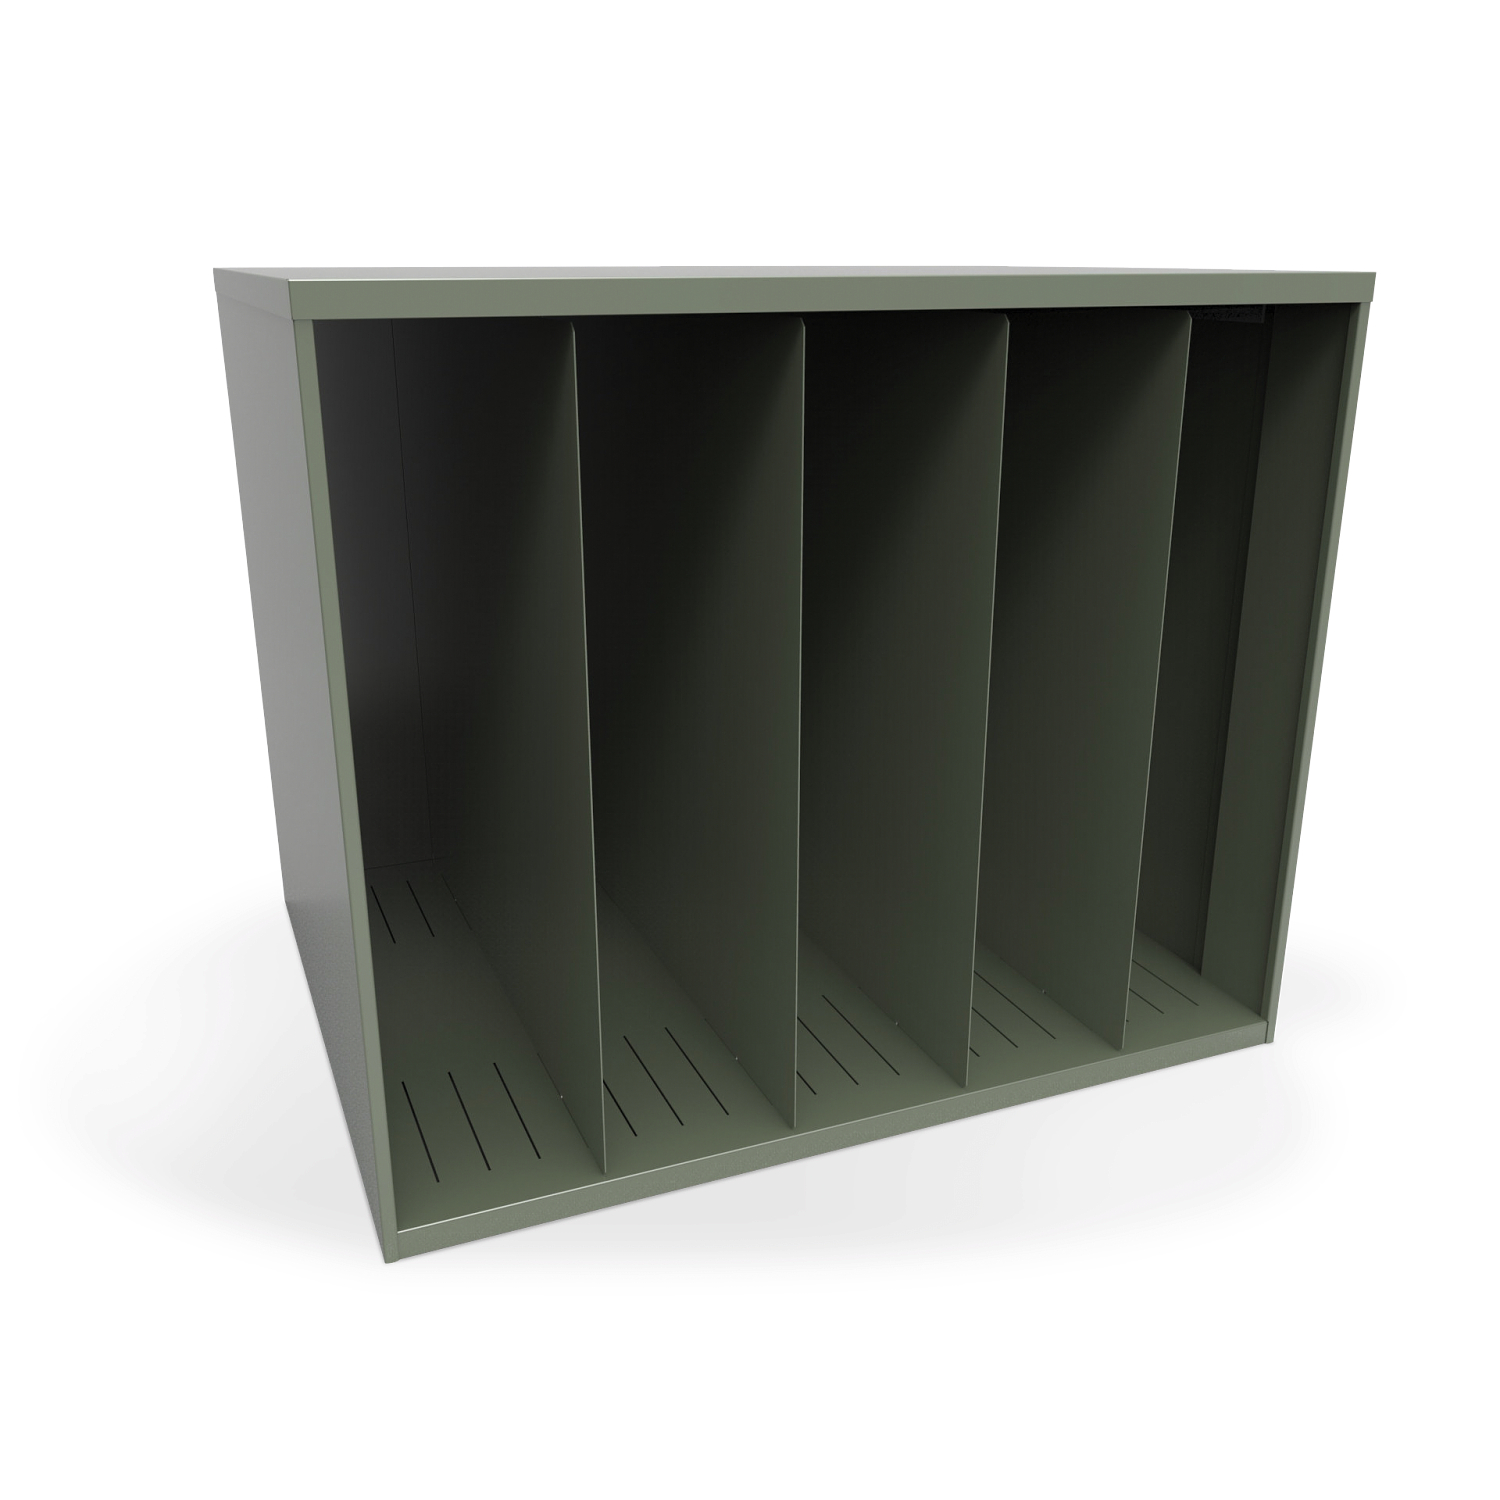 Poster Storage: Cubby Shelves, Flat File Cabinets & Hanging Folders